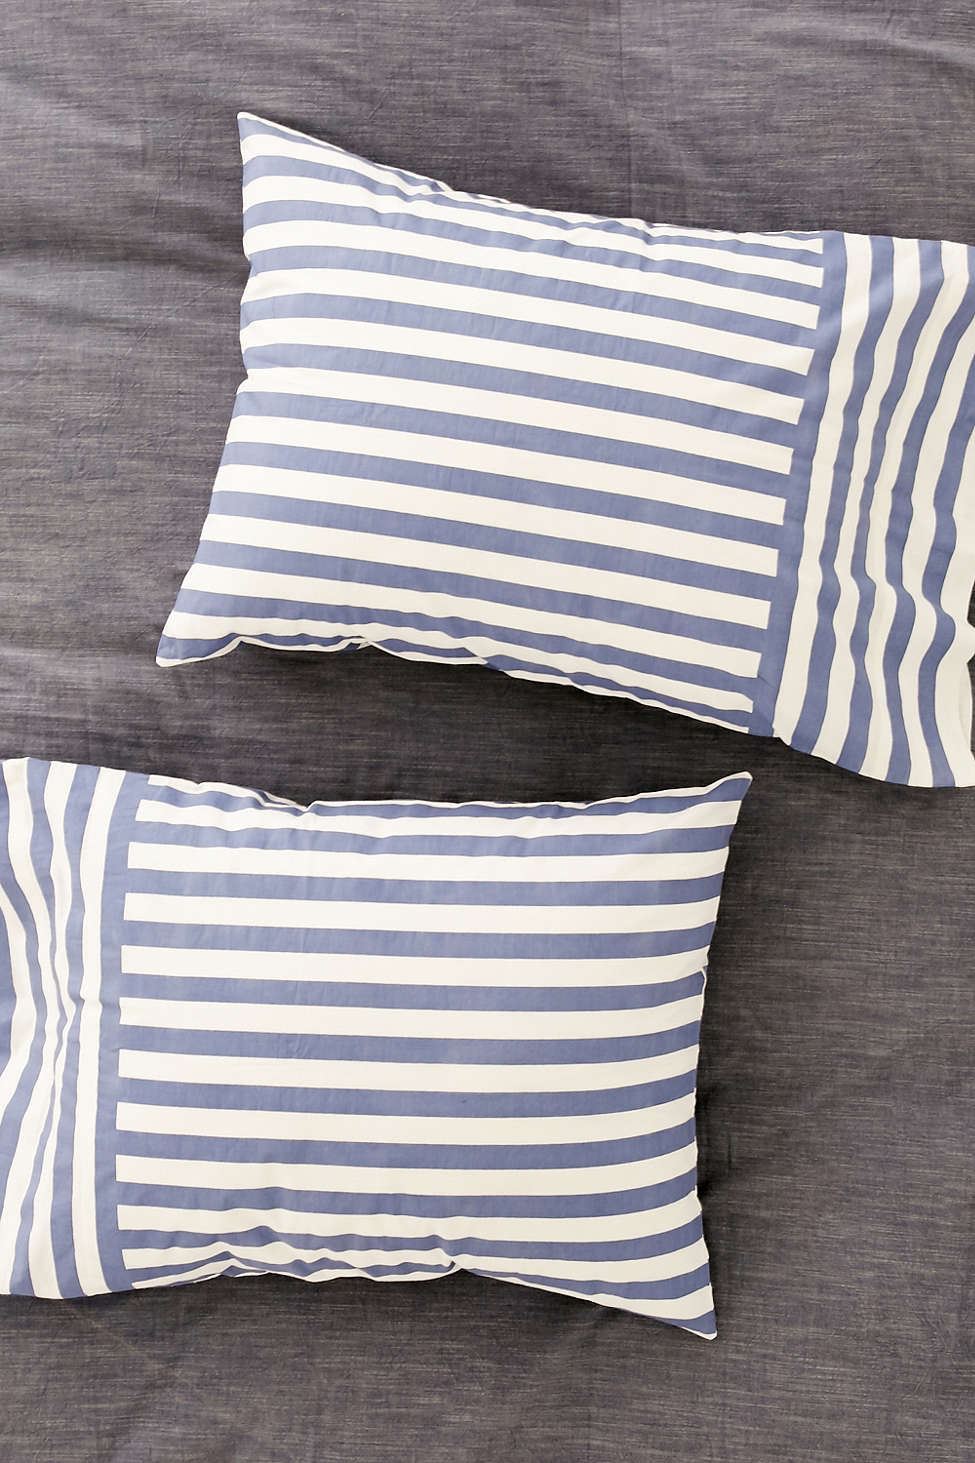 Striped-pillowcases-from-Urban-Outfitters